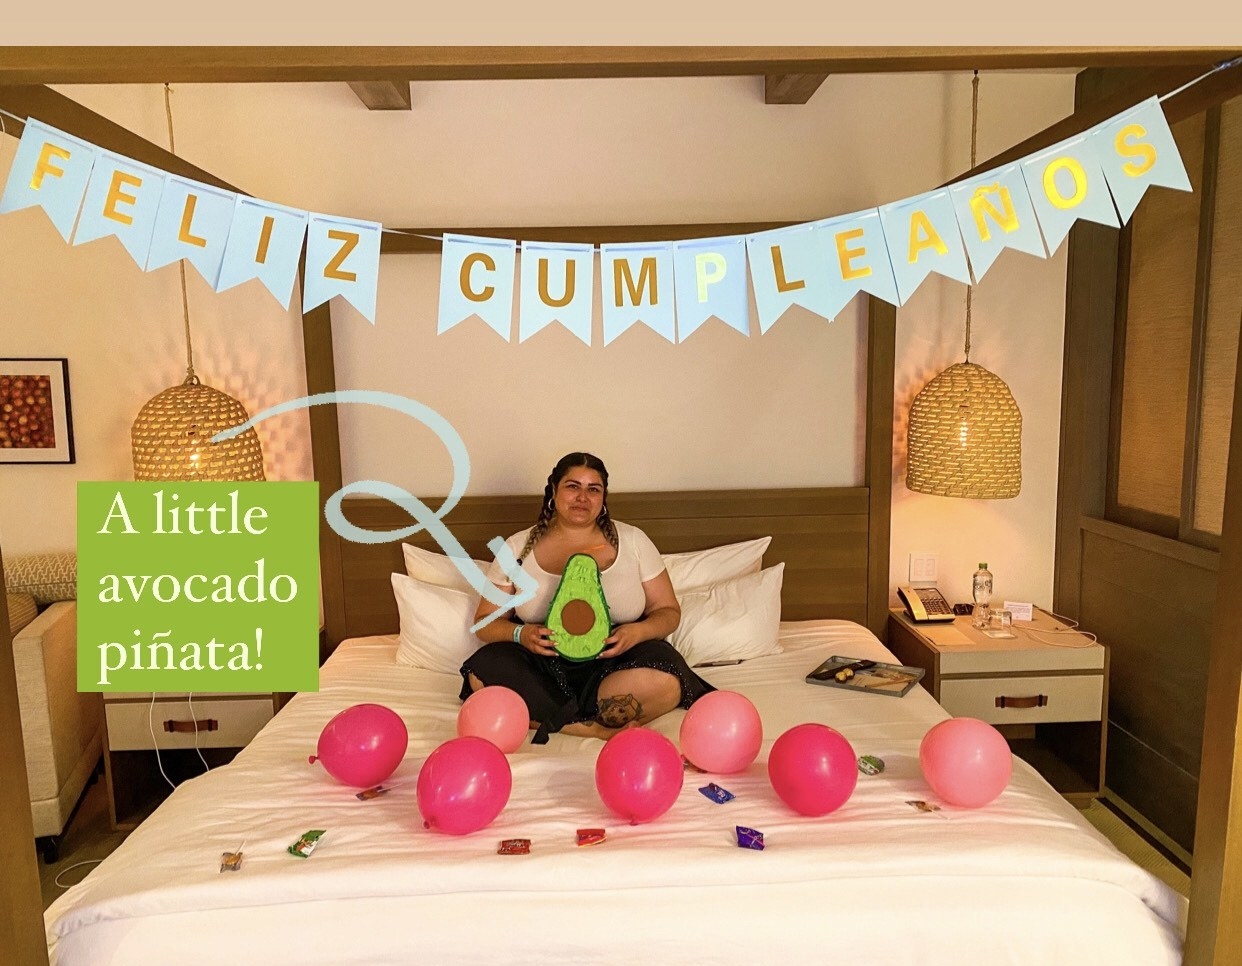 Woman sitting on a bed and holding a little avocado piñata in a room decorated for a birthday, with the sign &quot;Feliz cumpleaños&quot; hanging above the bed and balloons and sweet treats on the bed